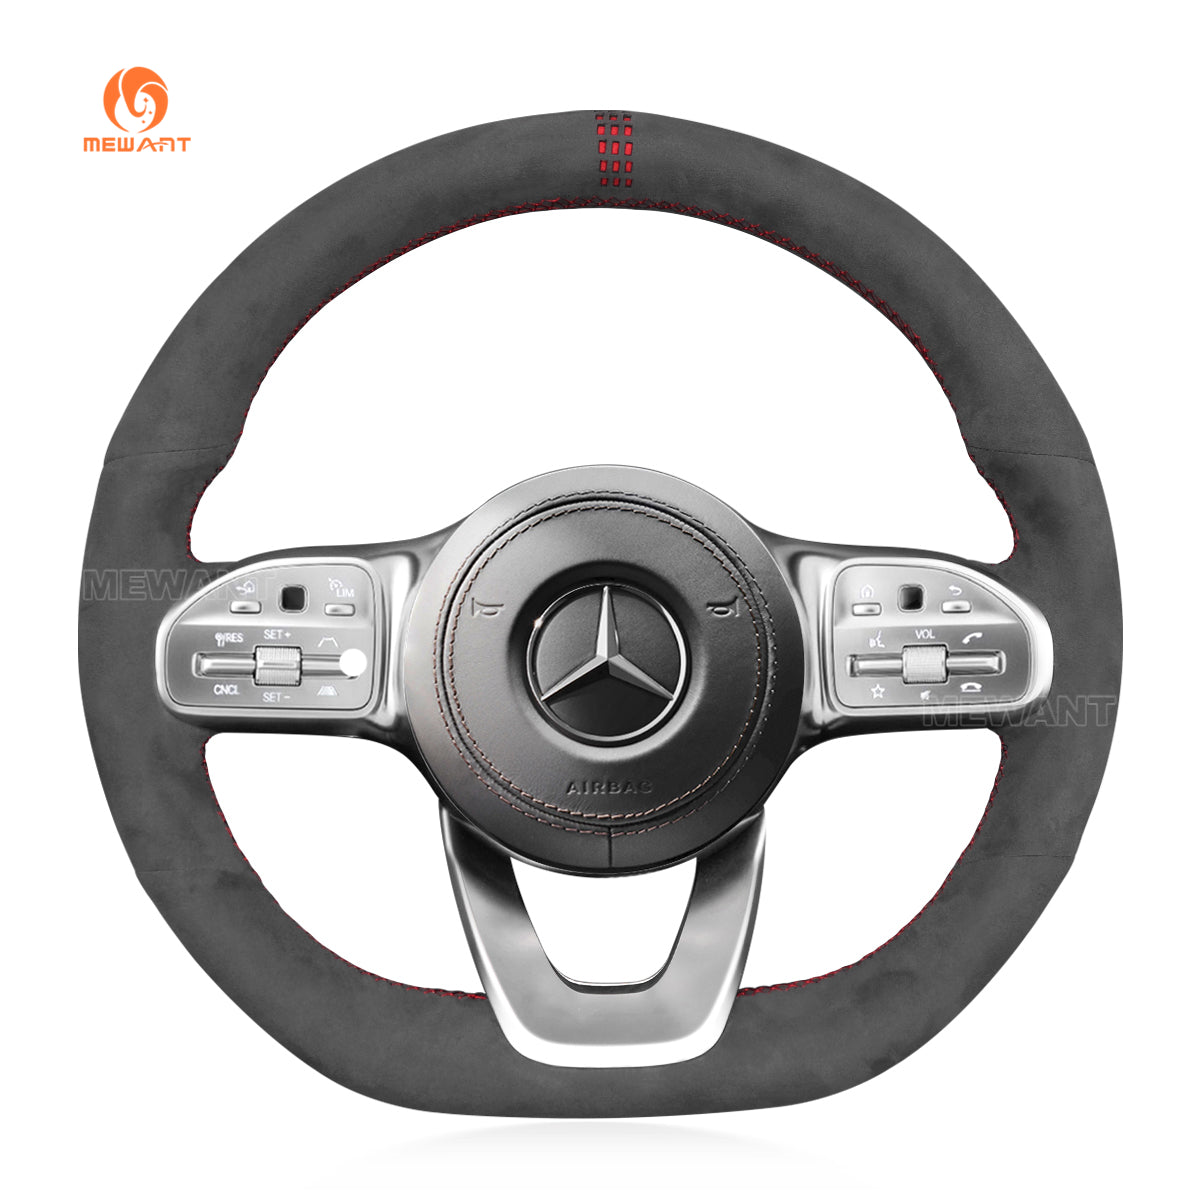 Car steering wheel cover for Mercedes Benz A-Class W177 2019-2021/C-Class W205 2019-2021/CLA-Class C118 2020-2021/CLS-Class C257 2019-2021/E-Class W213 2019-2020/G-Class W463 2019-2021/GLA-Class H247 2021/GLB-Class X247 2020-2021 GLC-Class X253 C253 2020-2021/GLE-Class W167 2020-2021 /Class W222 2018-2020